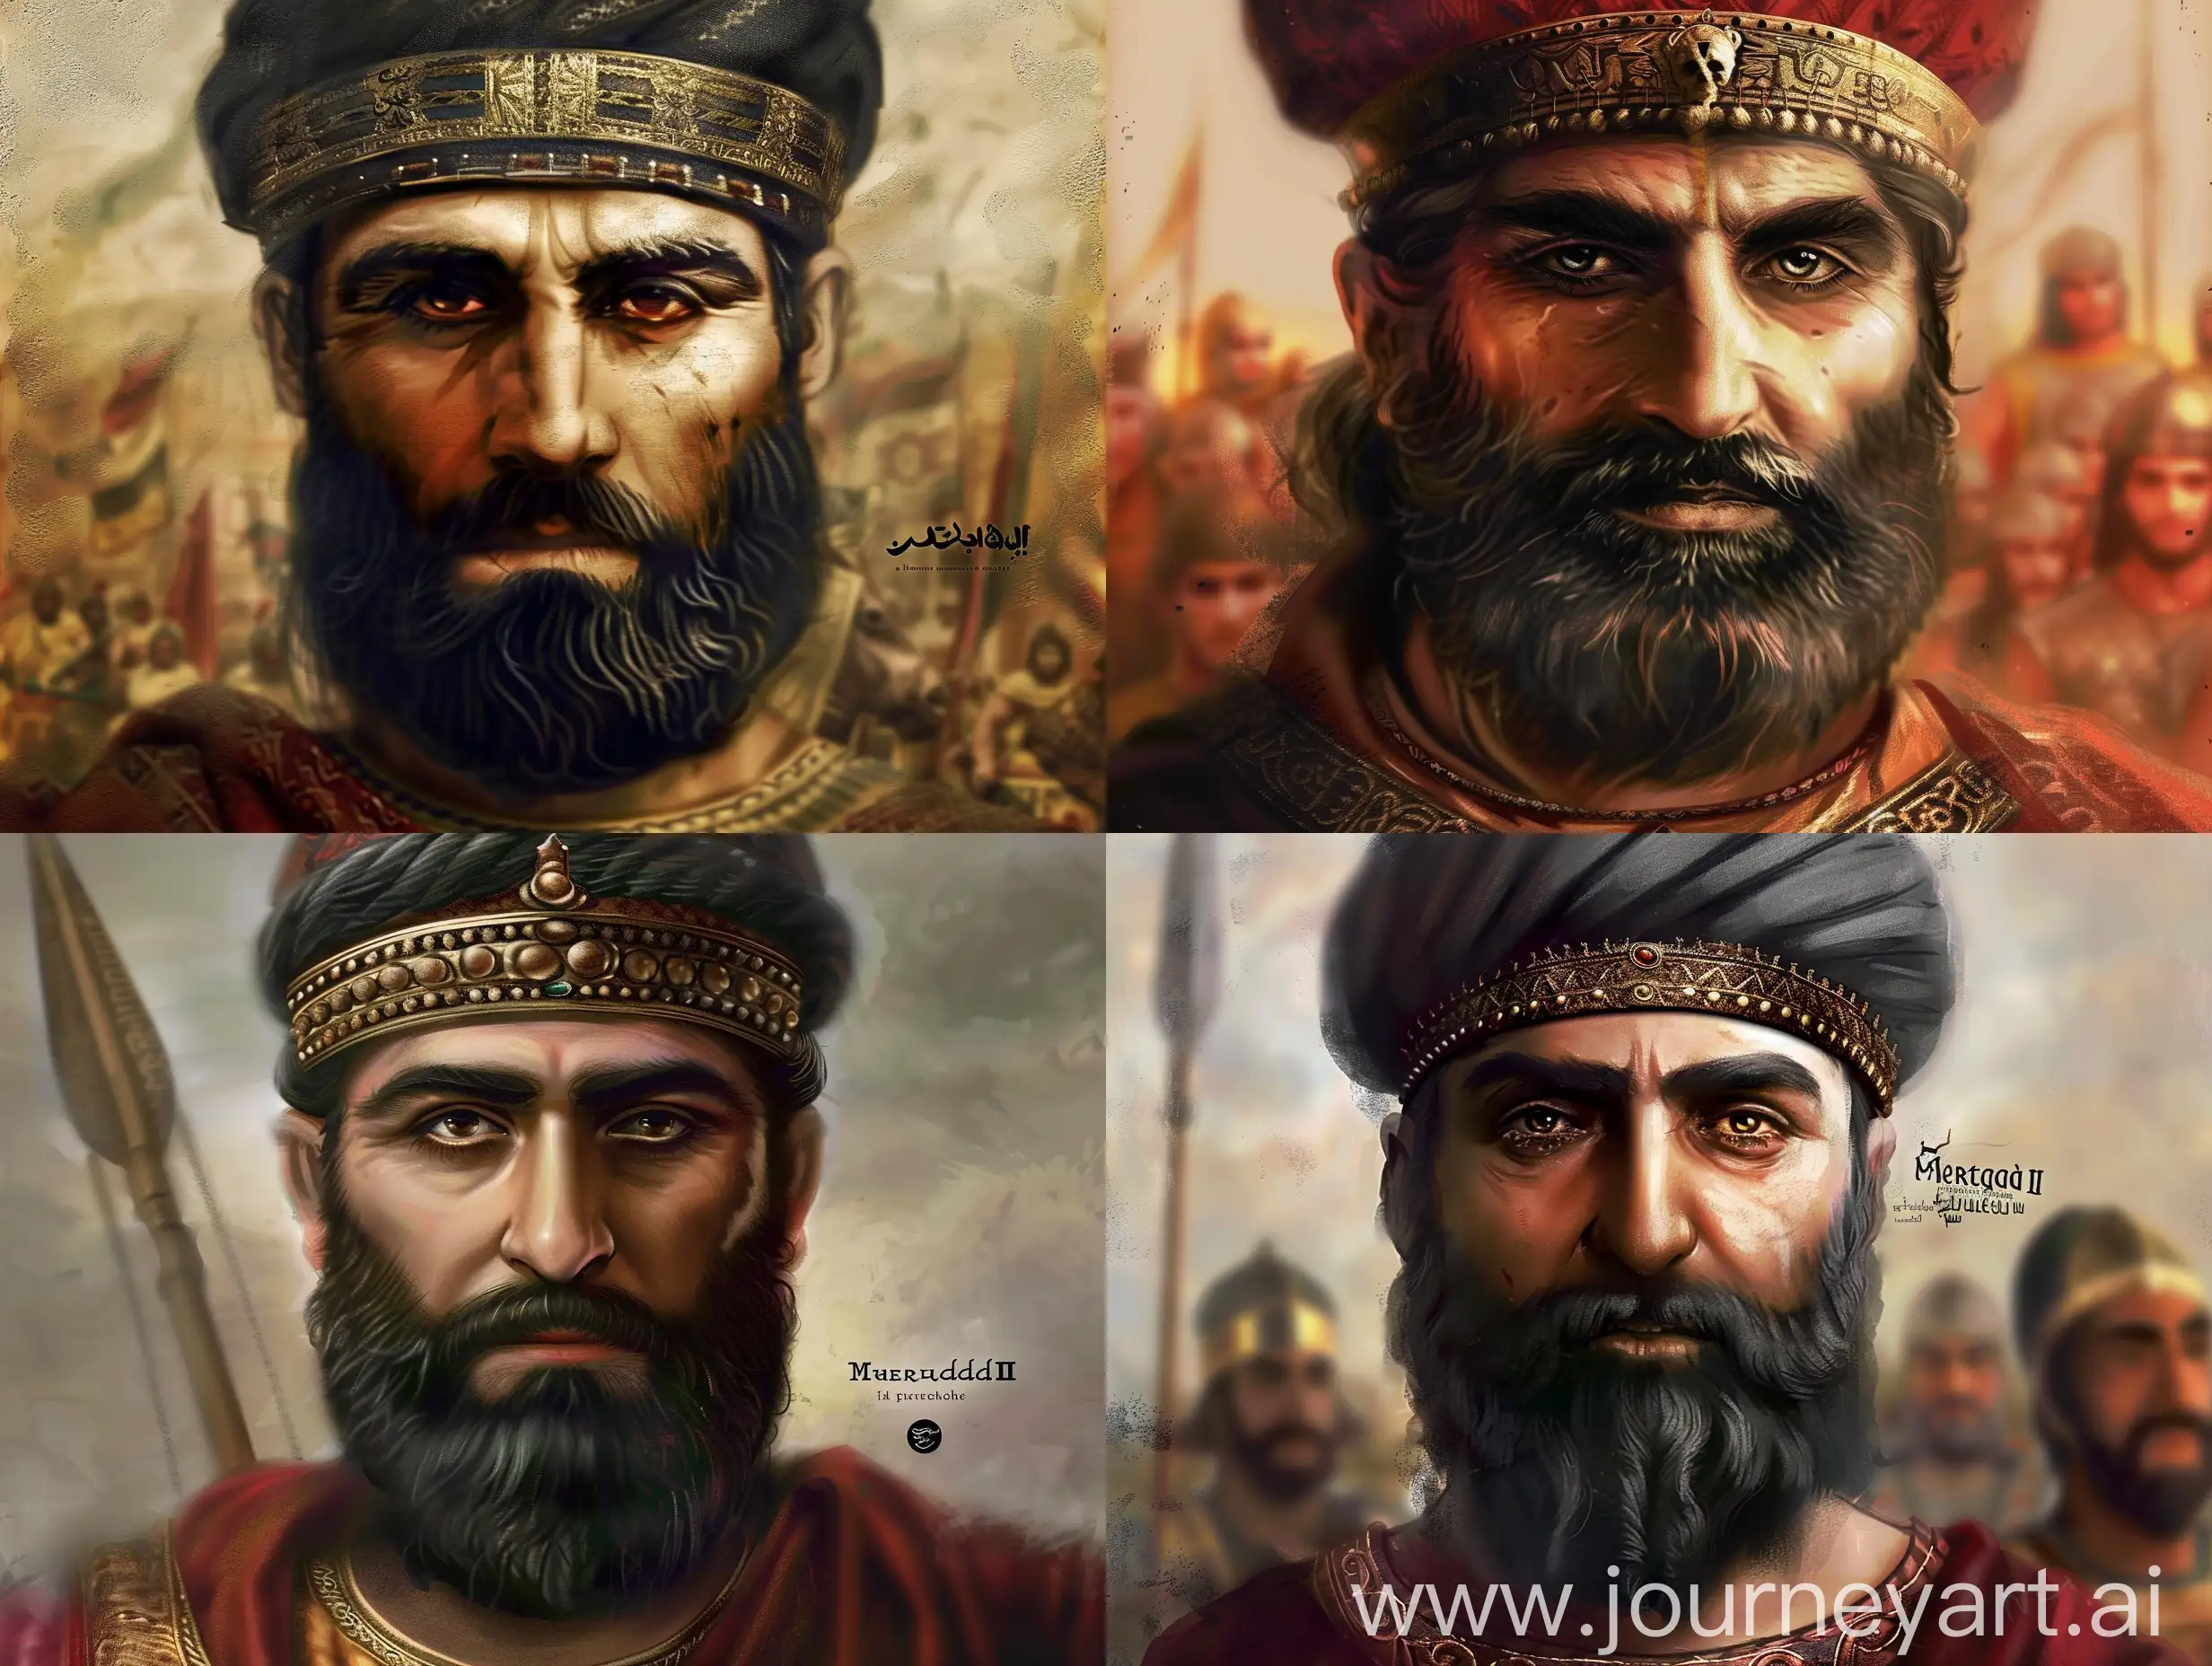 The face of Mehrdad II, the great king of the Parthian dynasty, based on the given image, recreate Mehrdad's face in an epic background.